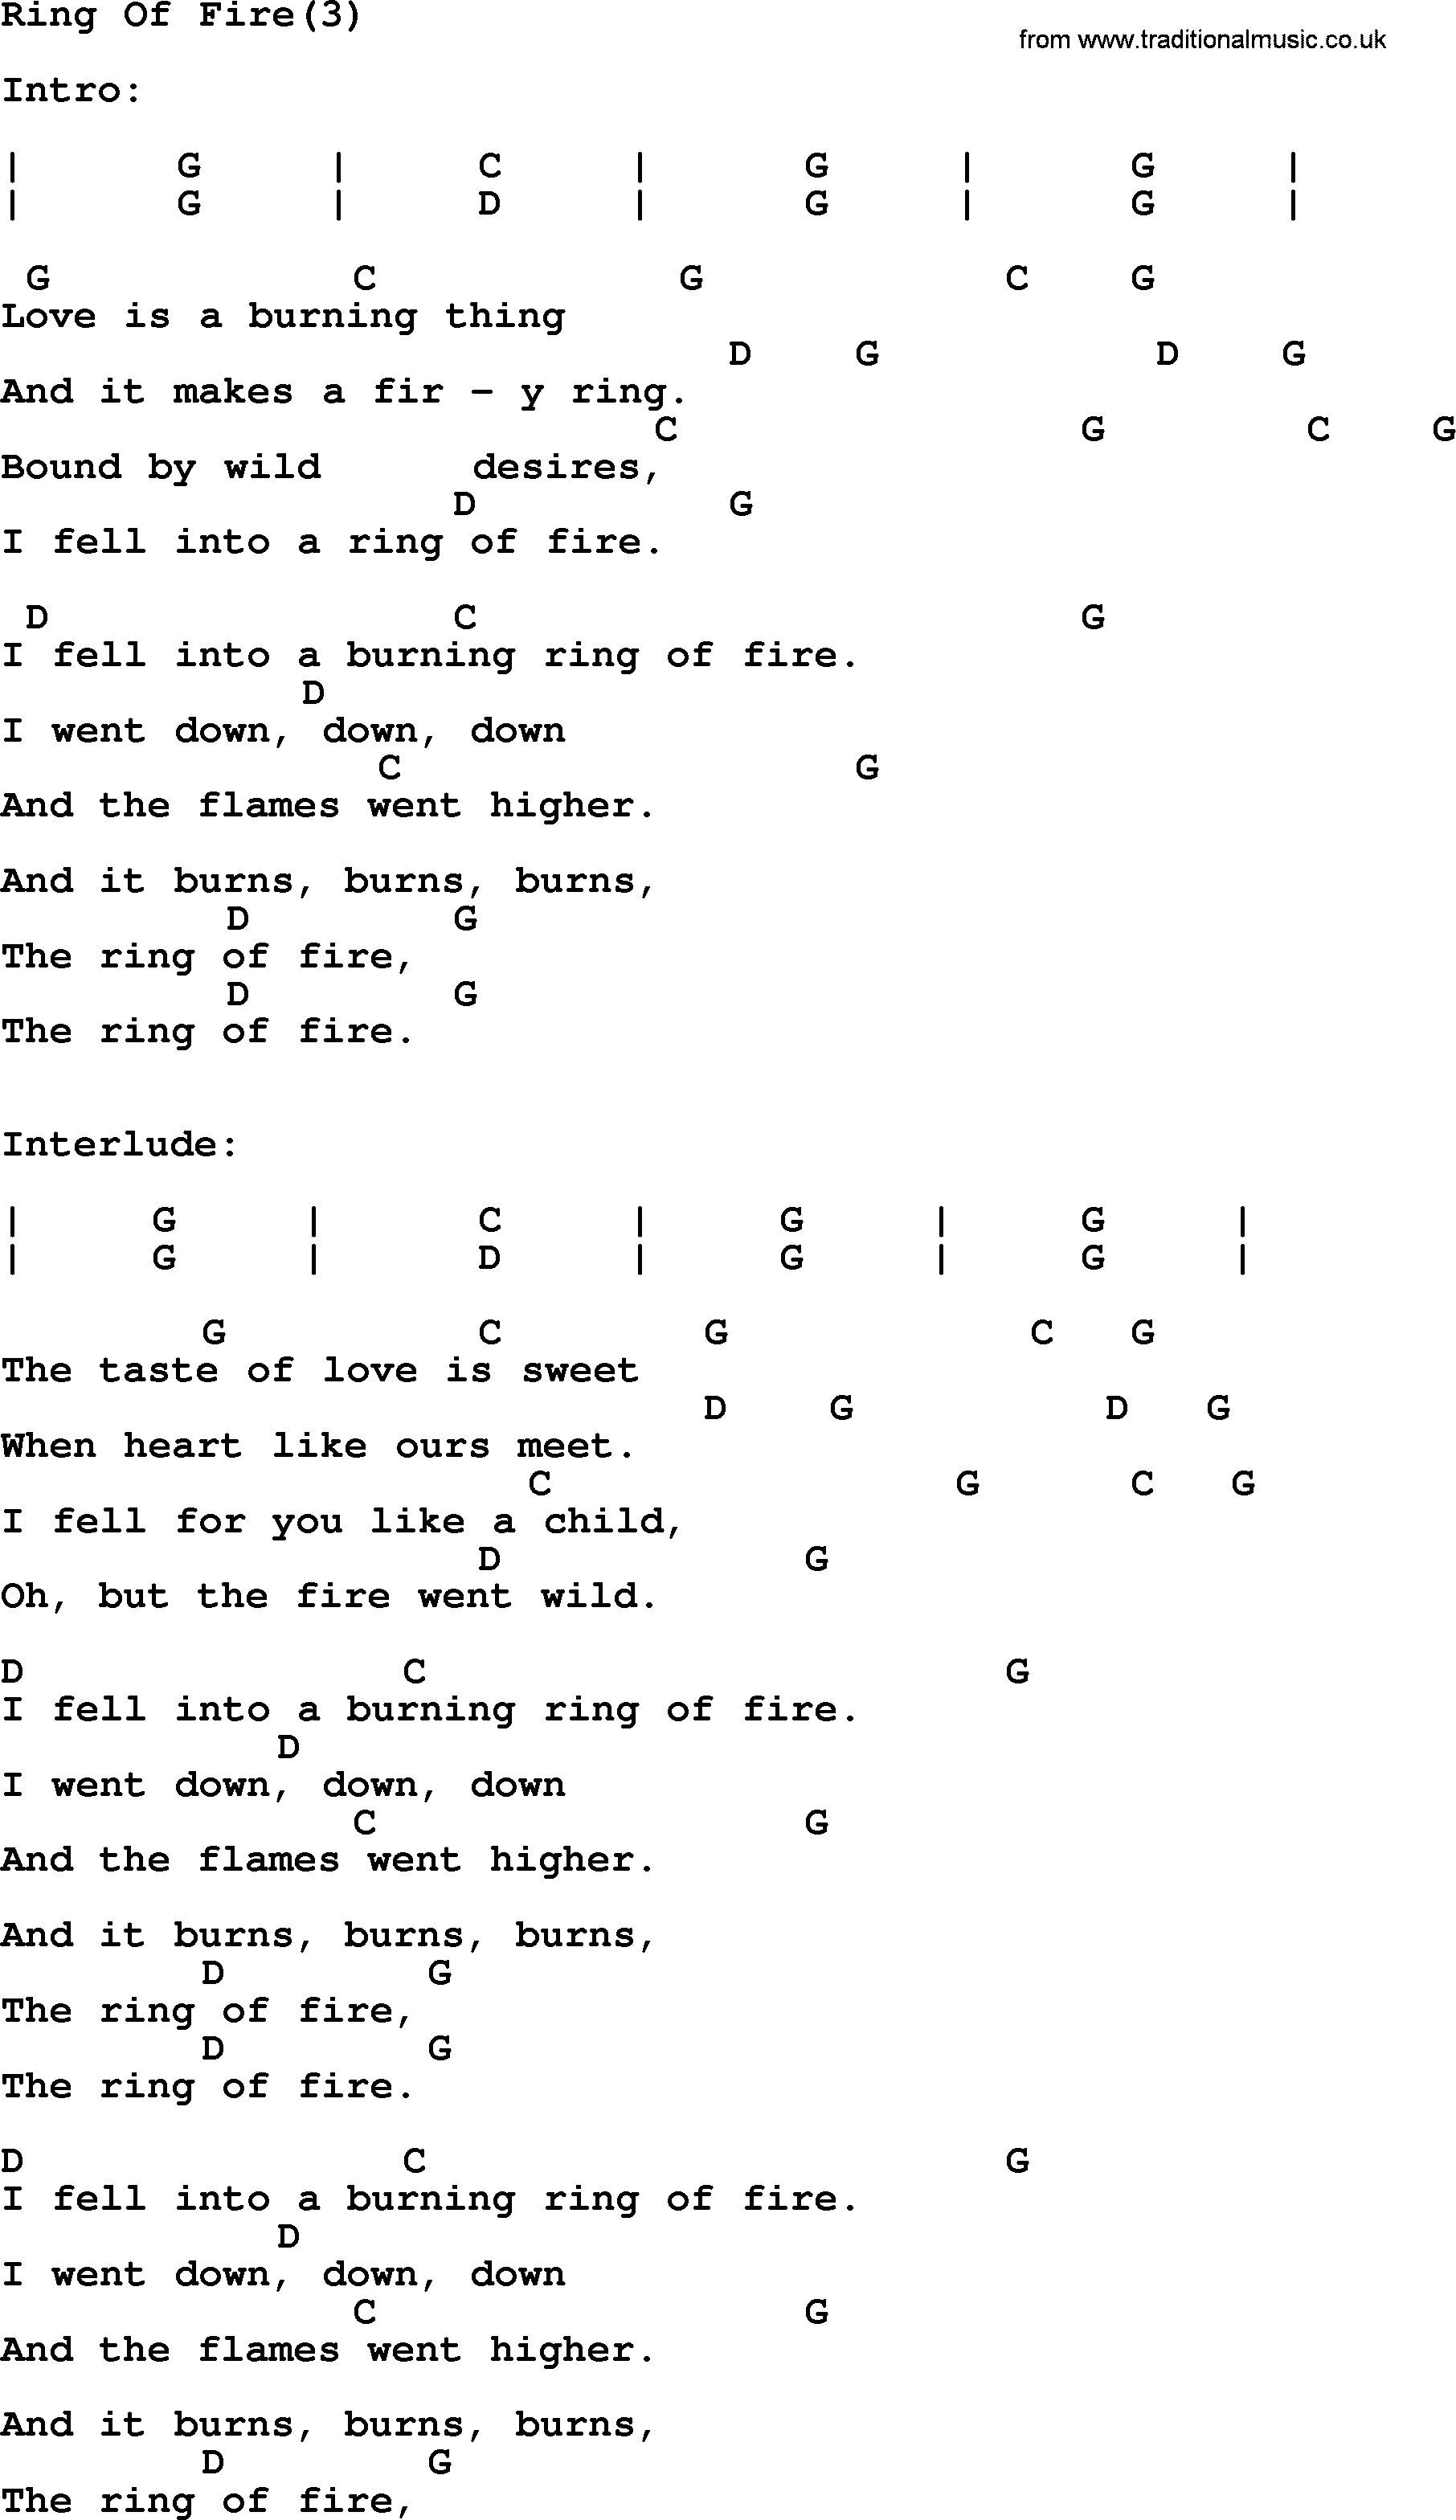 Ring Of Fire Chords Johnny Cash Song Ring Of Fire3 Lyrics And Chords